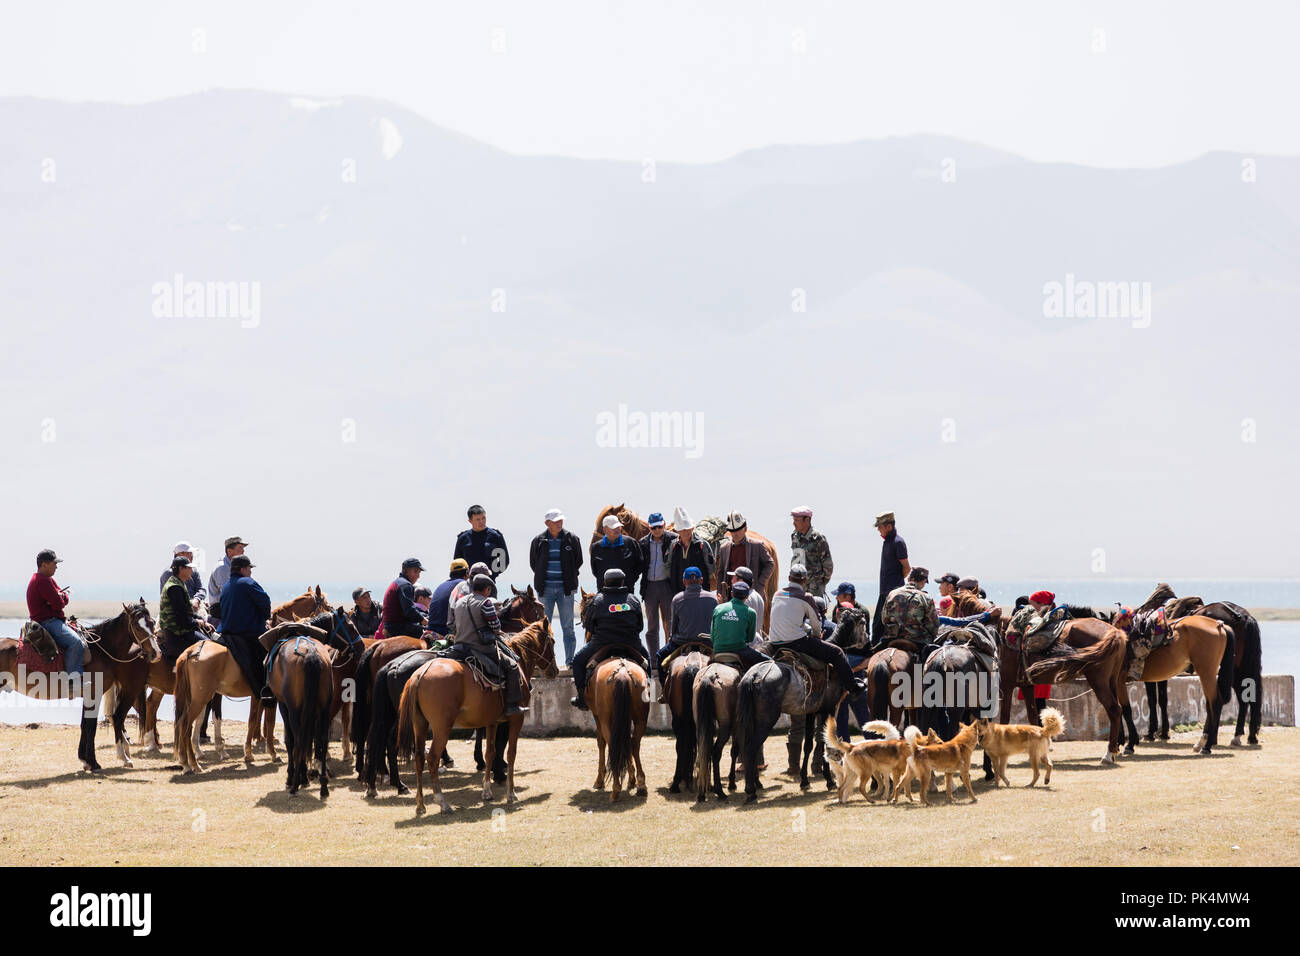 Song Kul, Kyrgyzstan, August 8 2018: Many Kyrgyz people meet with their horses at Song Kul Lake in Kyrgyzstan for a debate Stock Photo